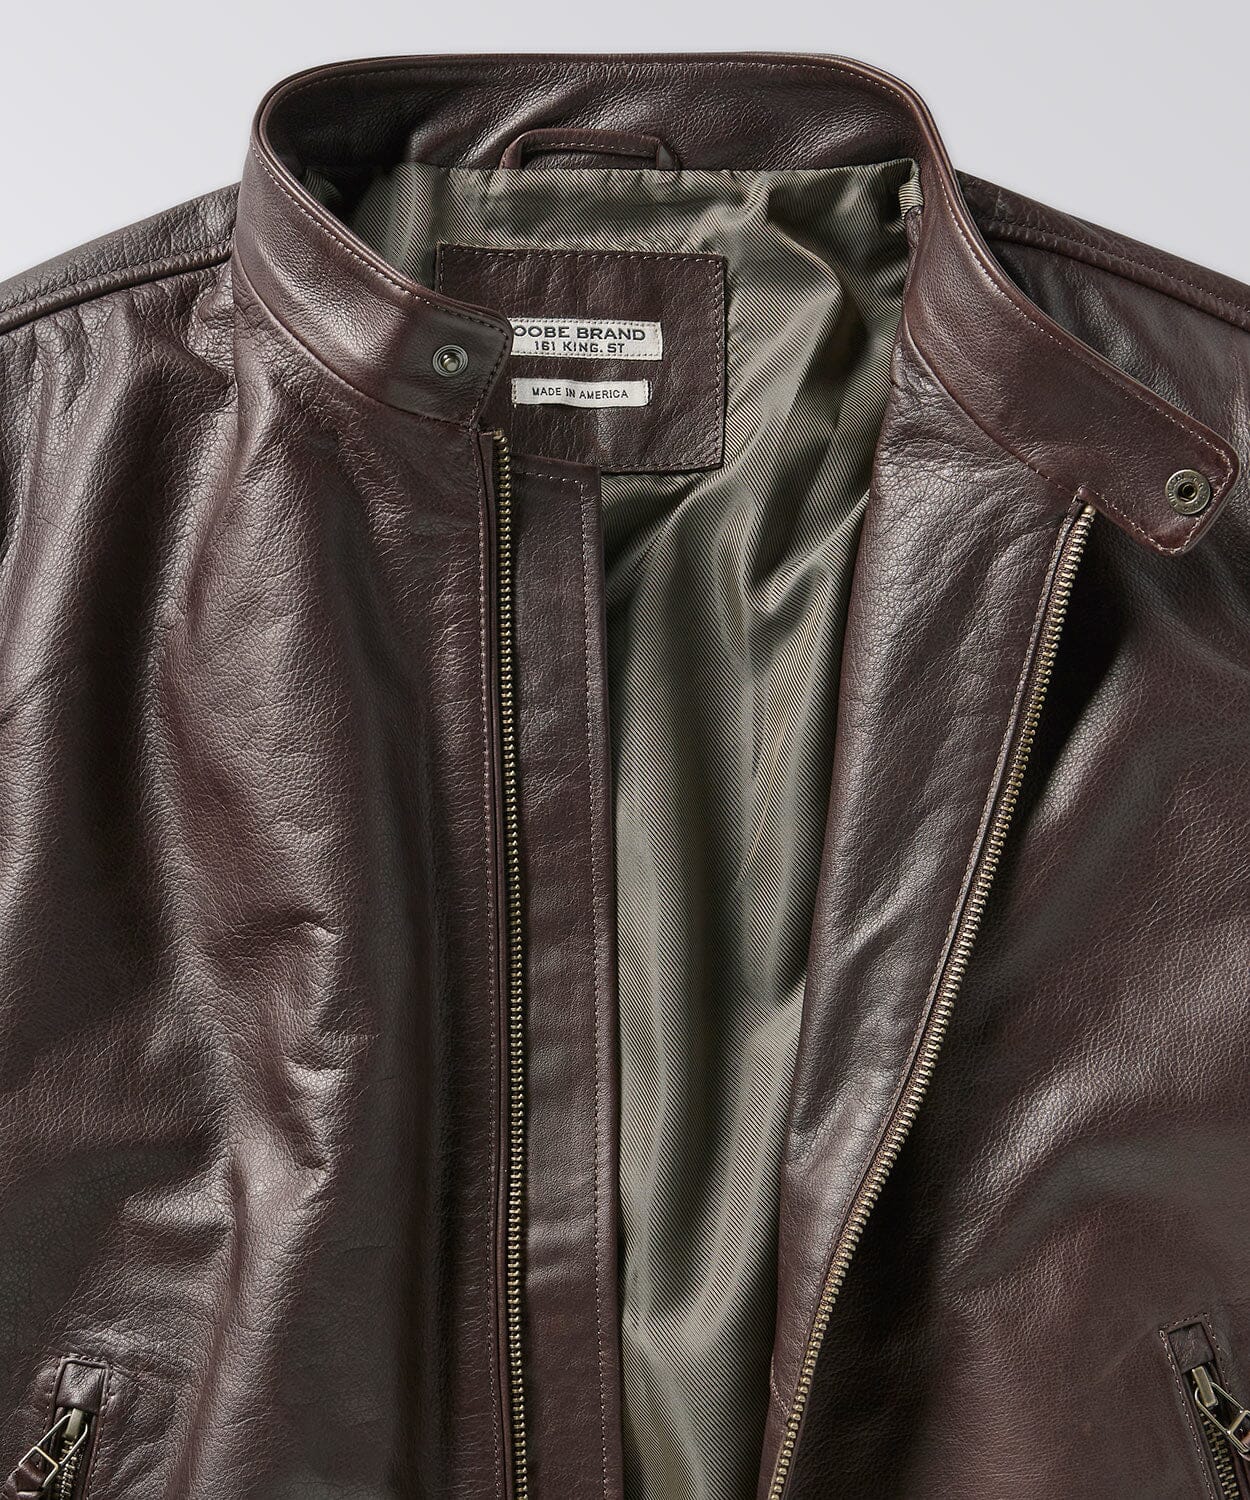 Leather Cafe Racer Jackets OOBE BRAND 